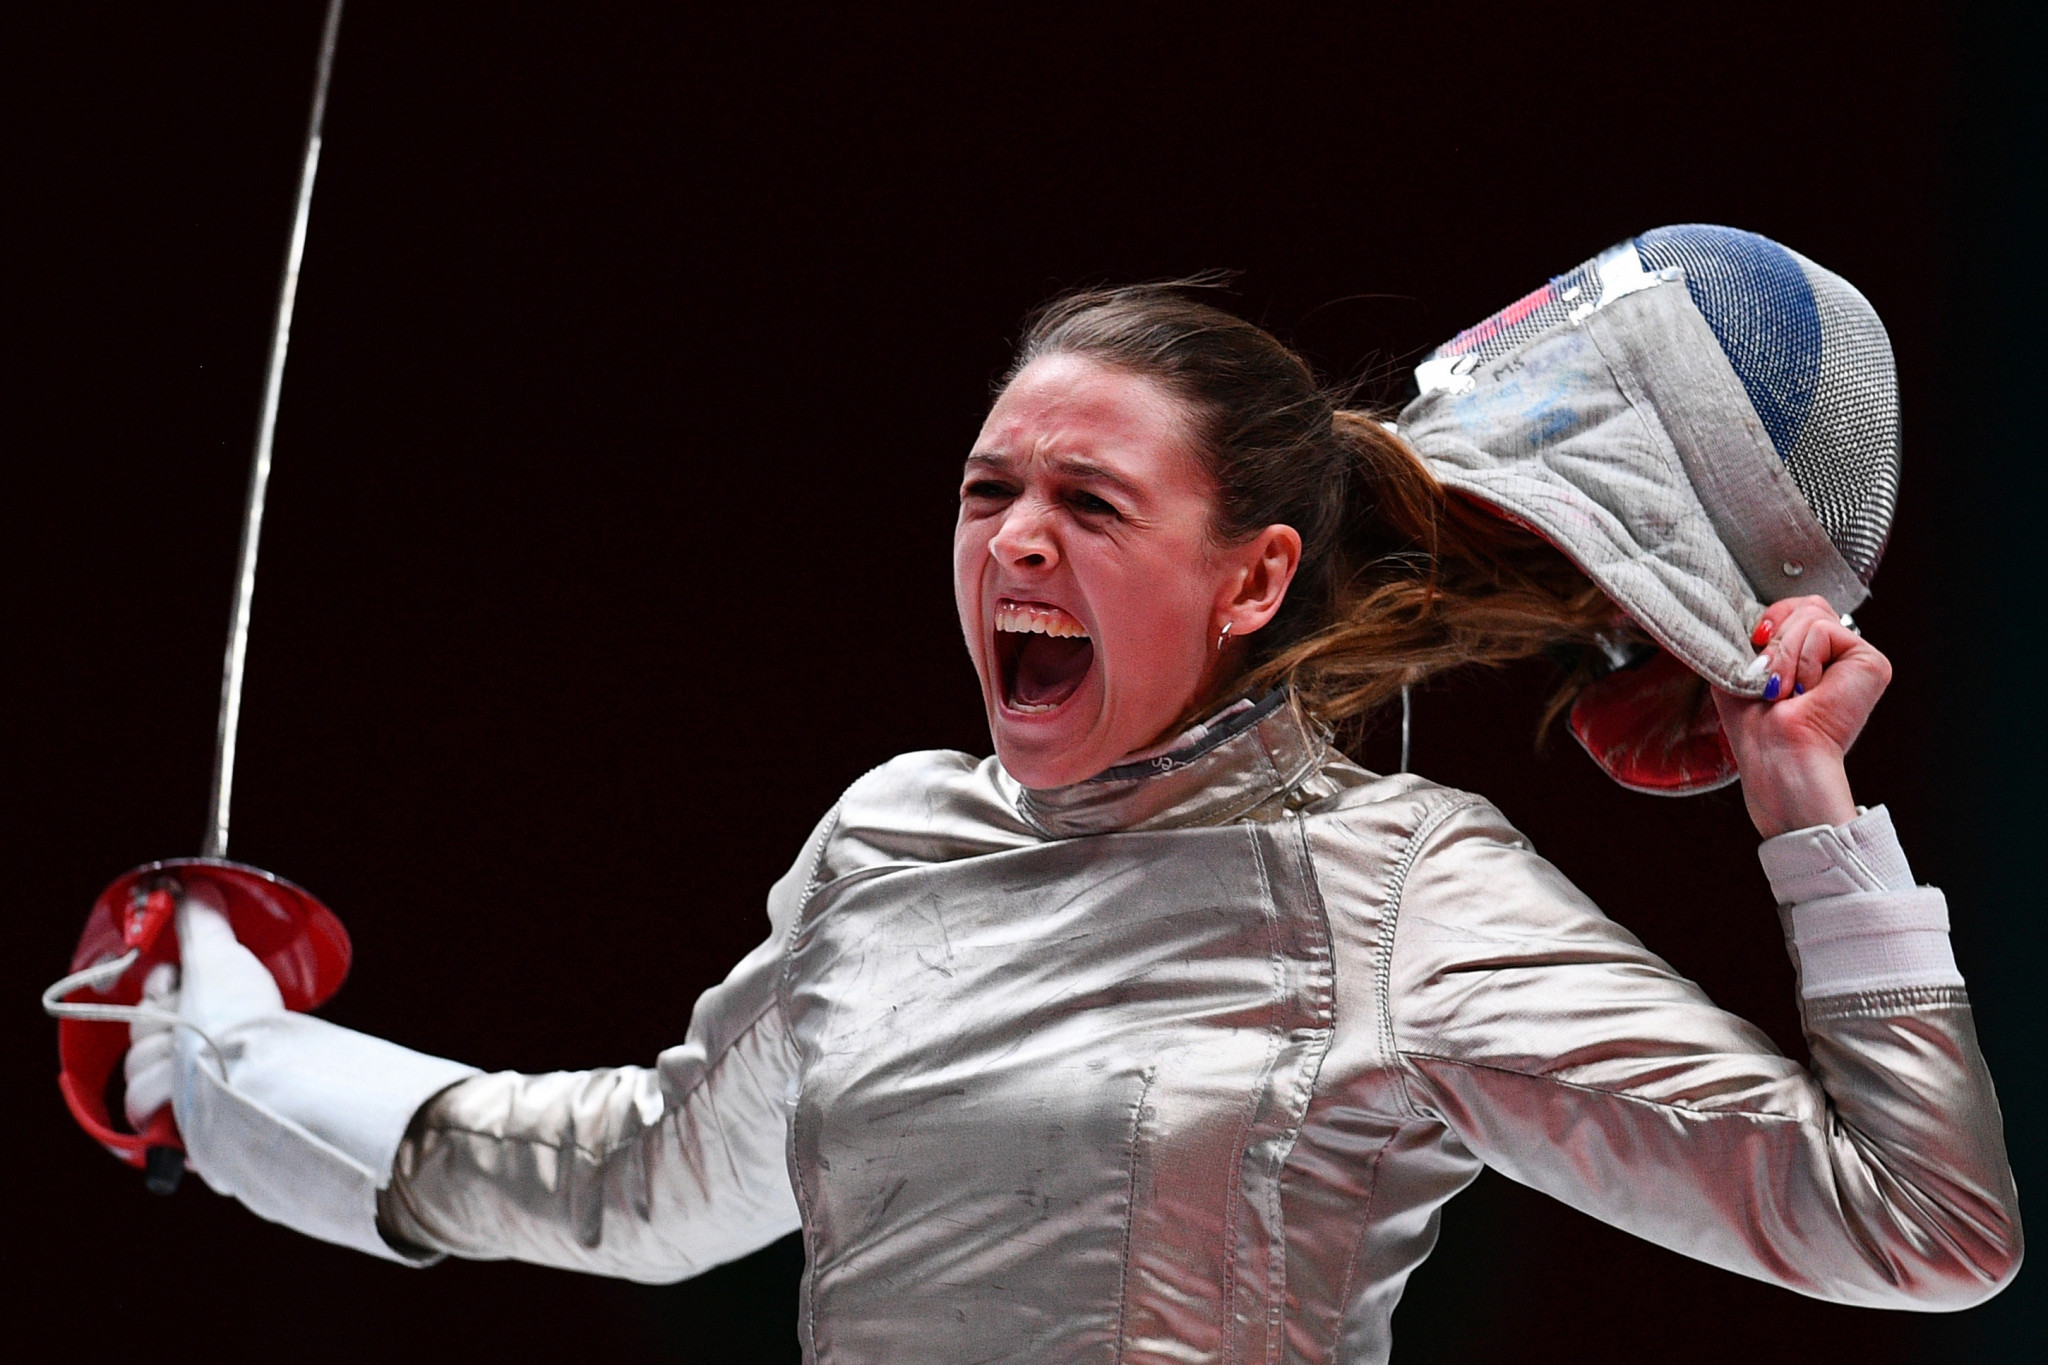 France's Manon Brunet was triumphant in the FIE Women's Sabre World Cup in Sint-Niklaas ©Getty Images